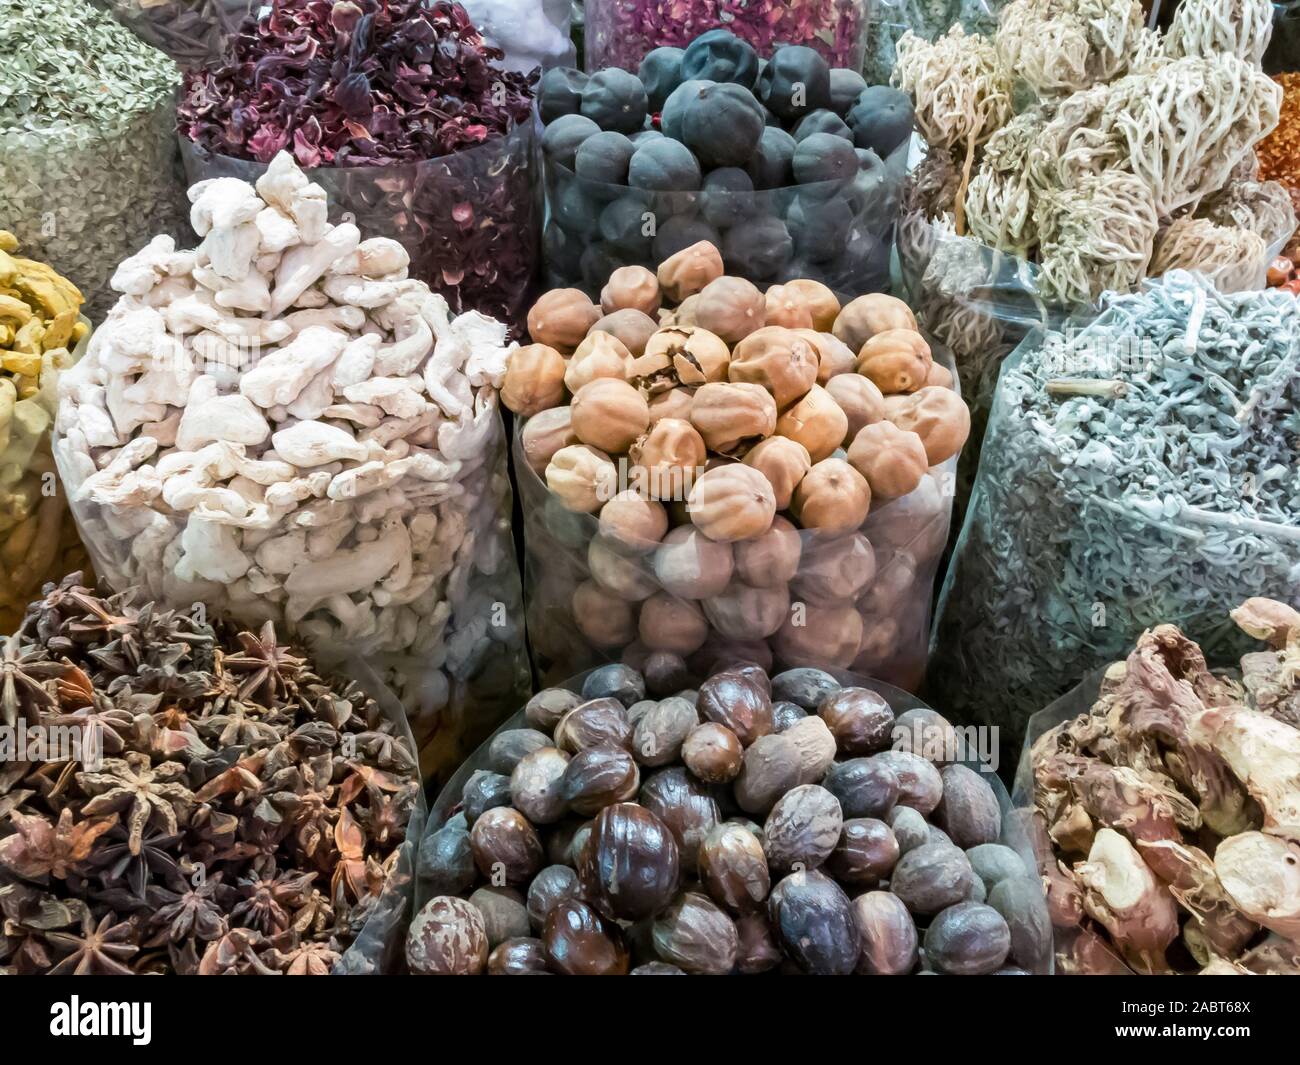 Assortment of spices displayed in bags in the famous Spice Souk in Deira area of Dubai, United Arab Emirates Stock Photo